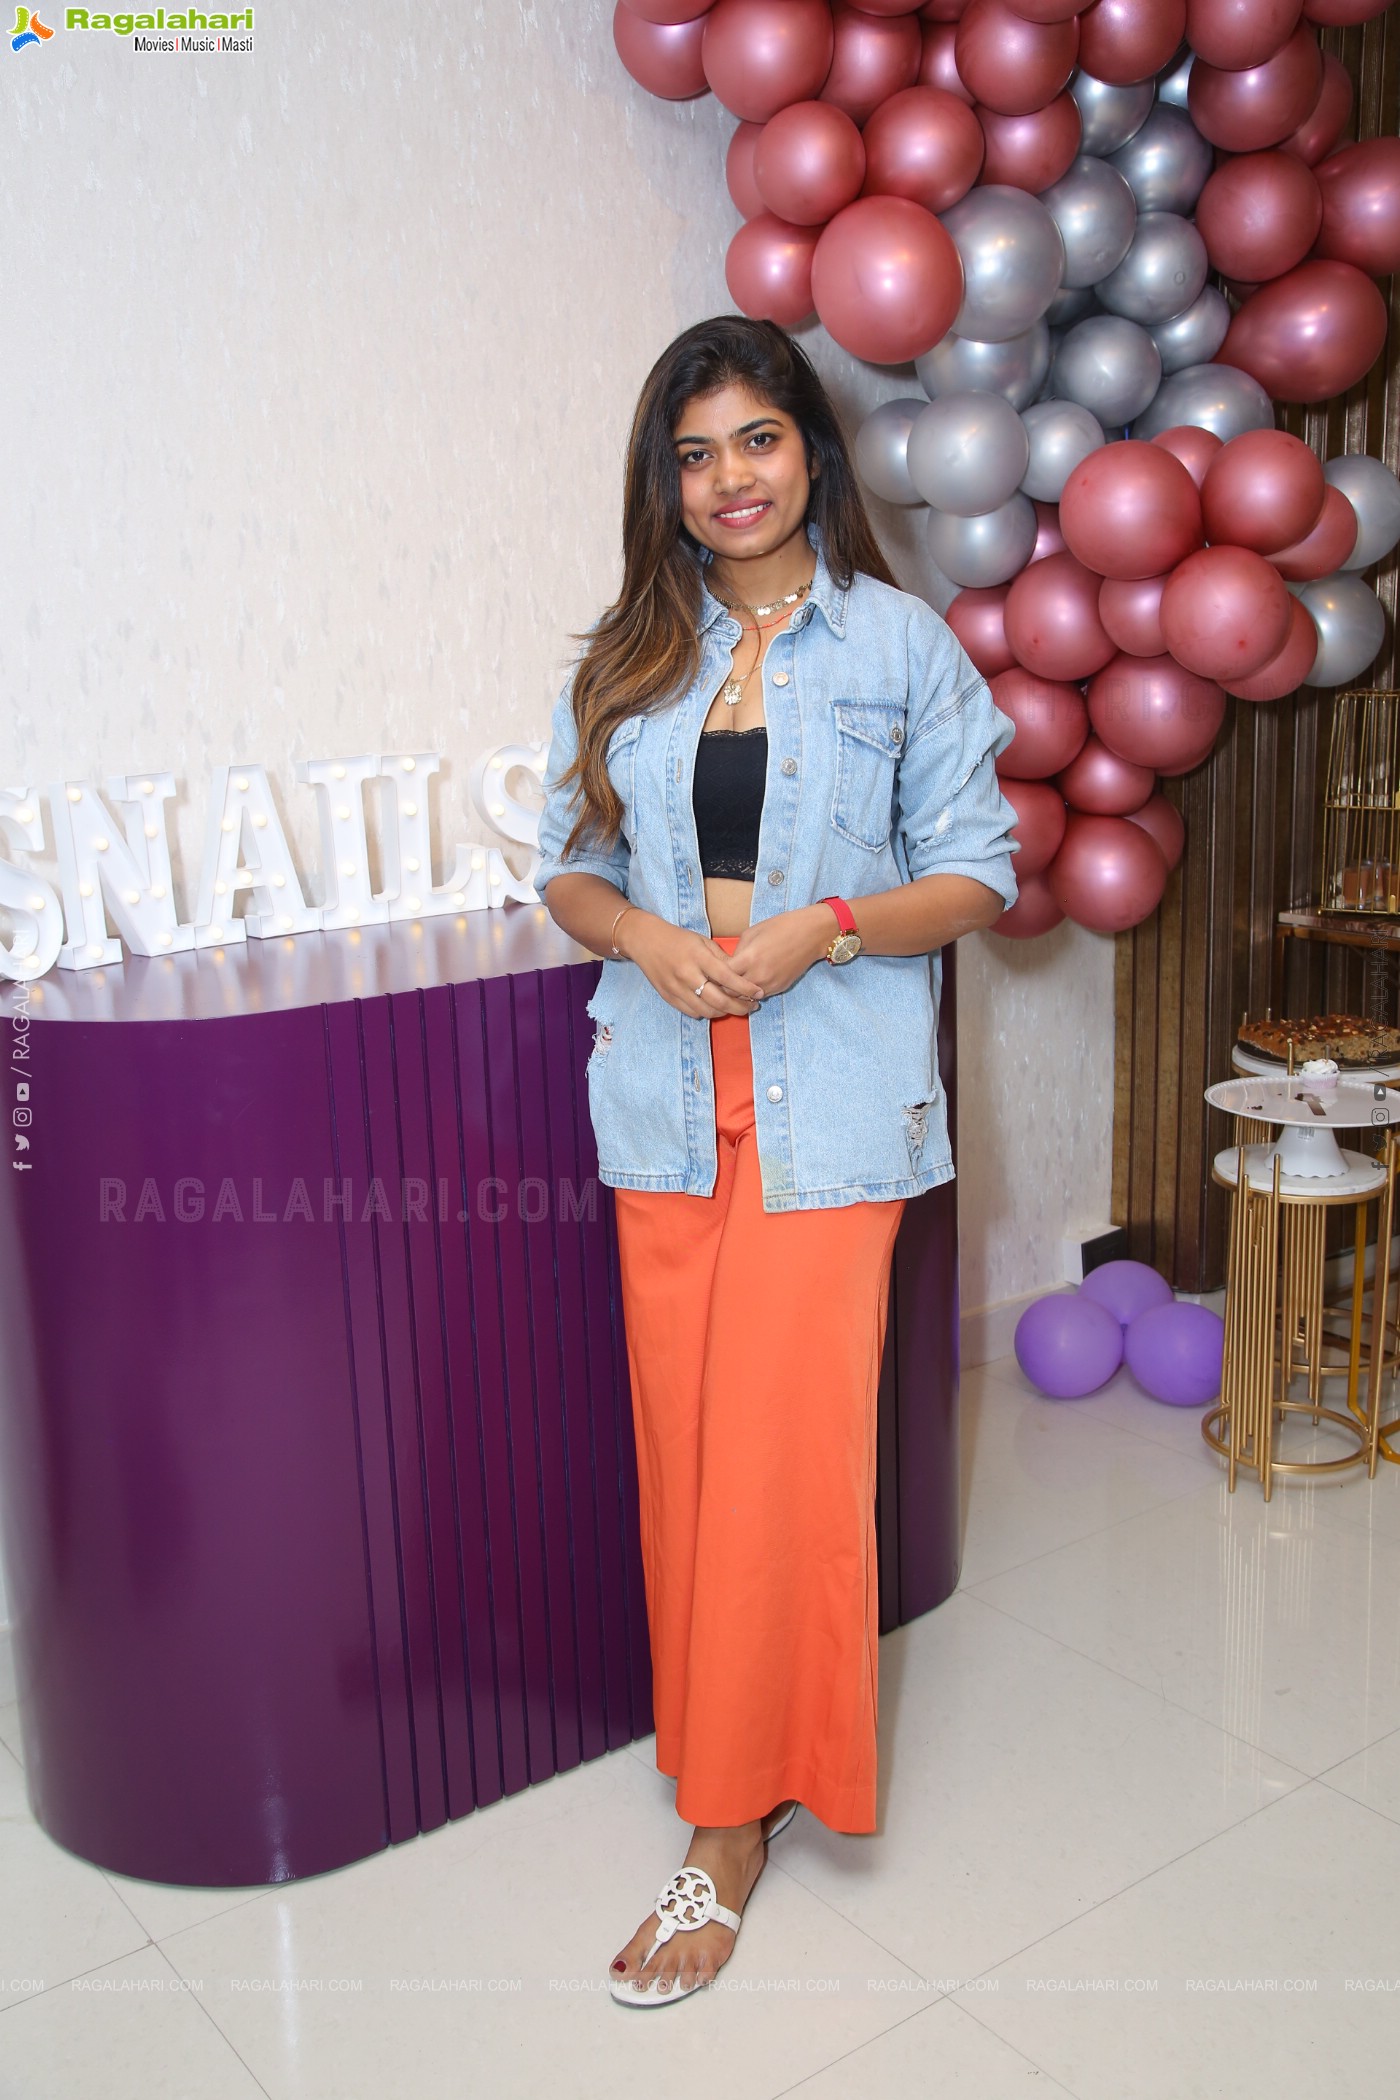 S'NAILS Unisex Salon - Pause to Pamper Launch